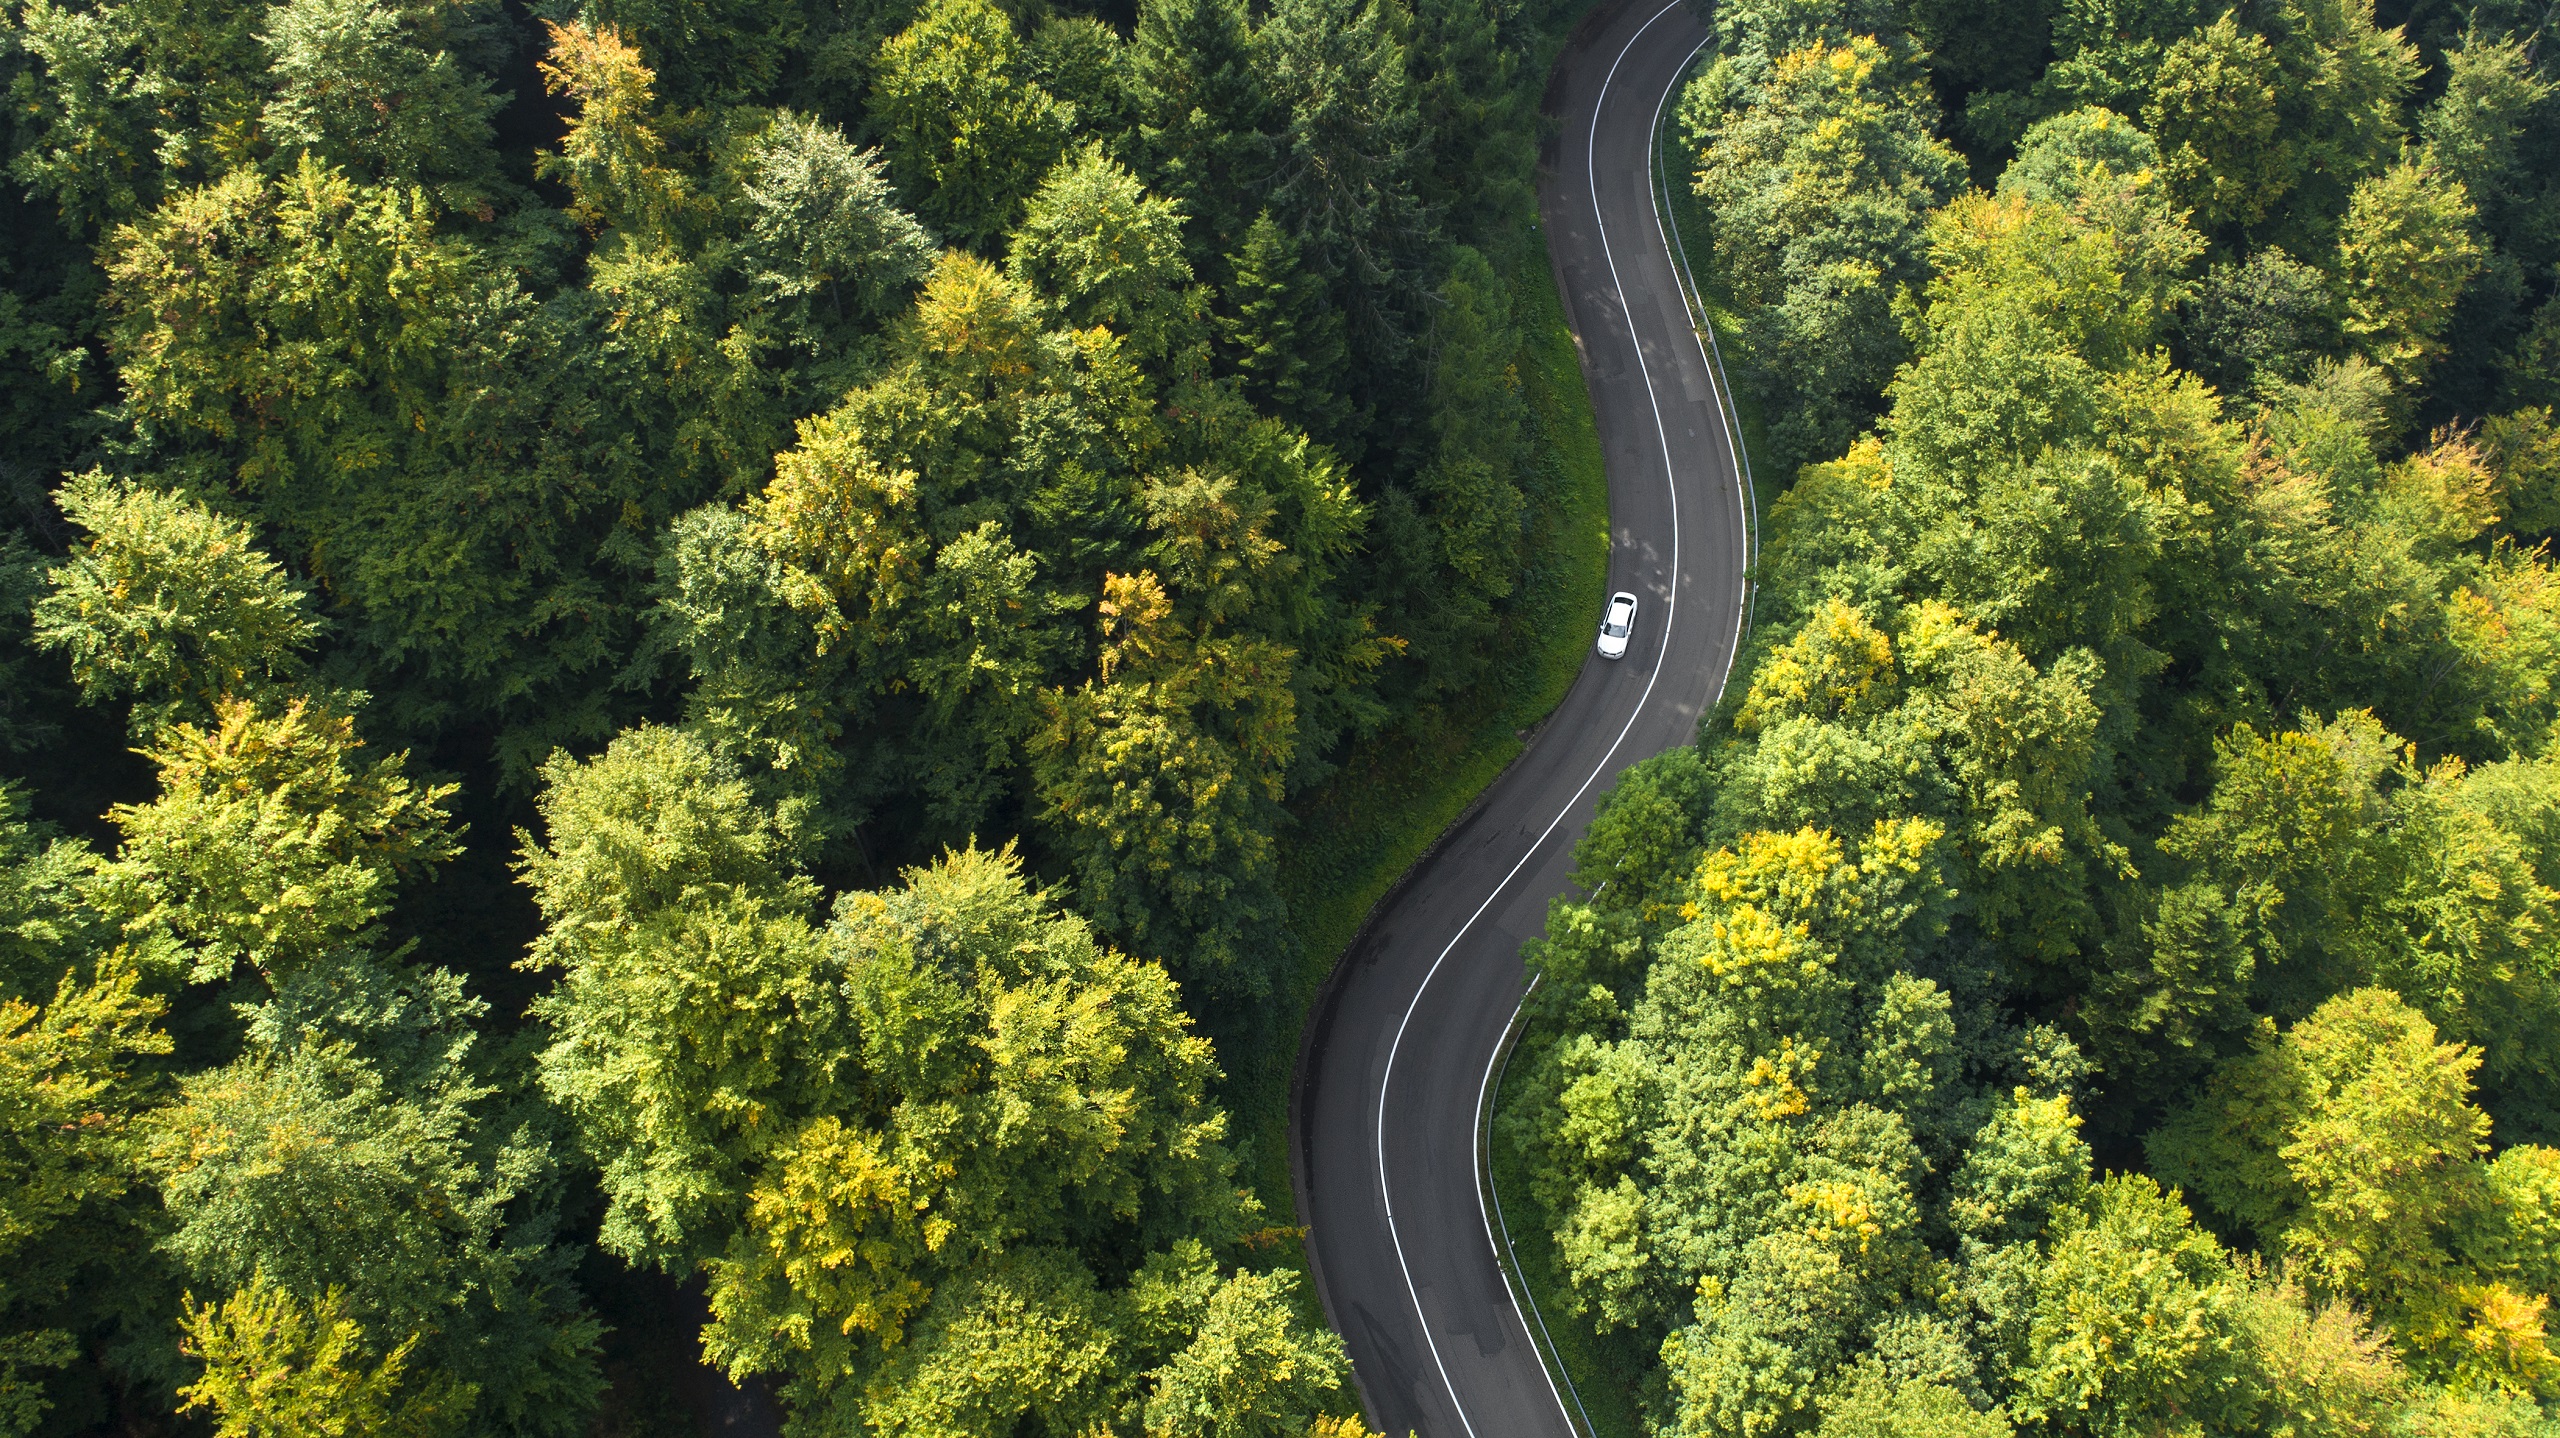 In the picture, we see a white car driving on a winding road through a dense forest as viewed from above.